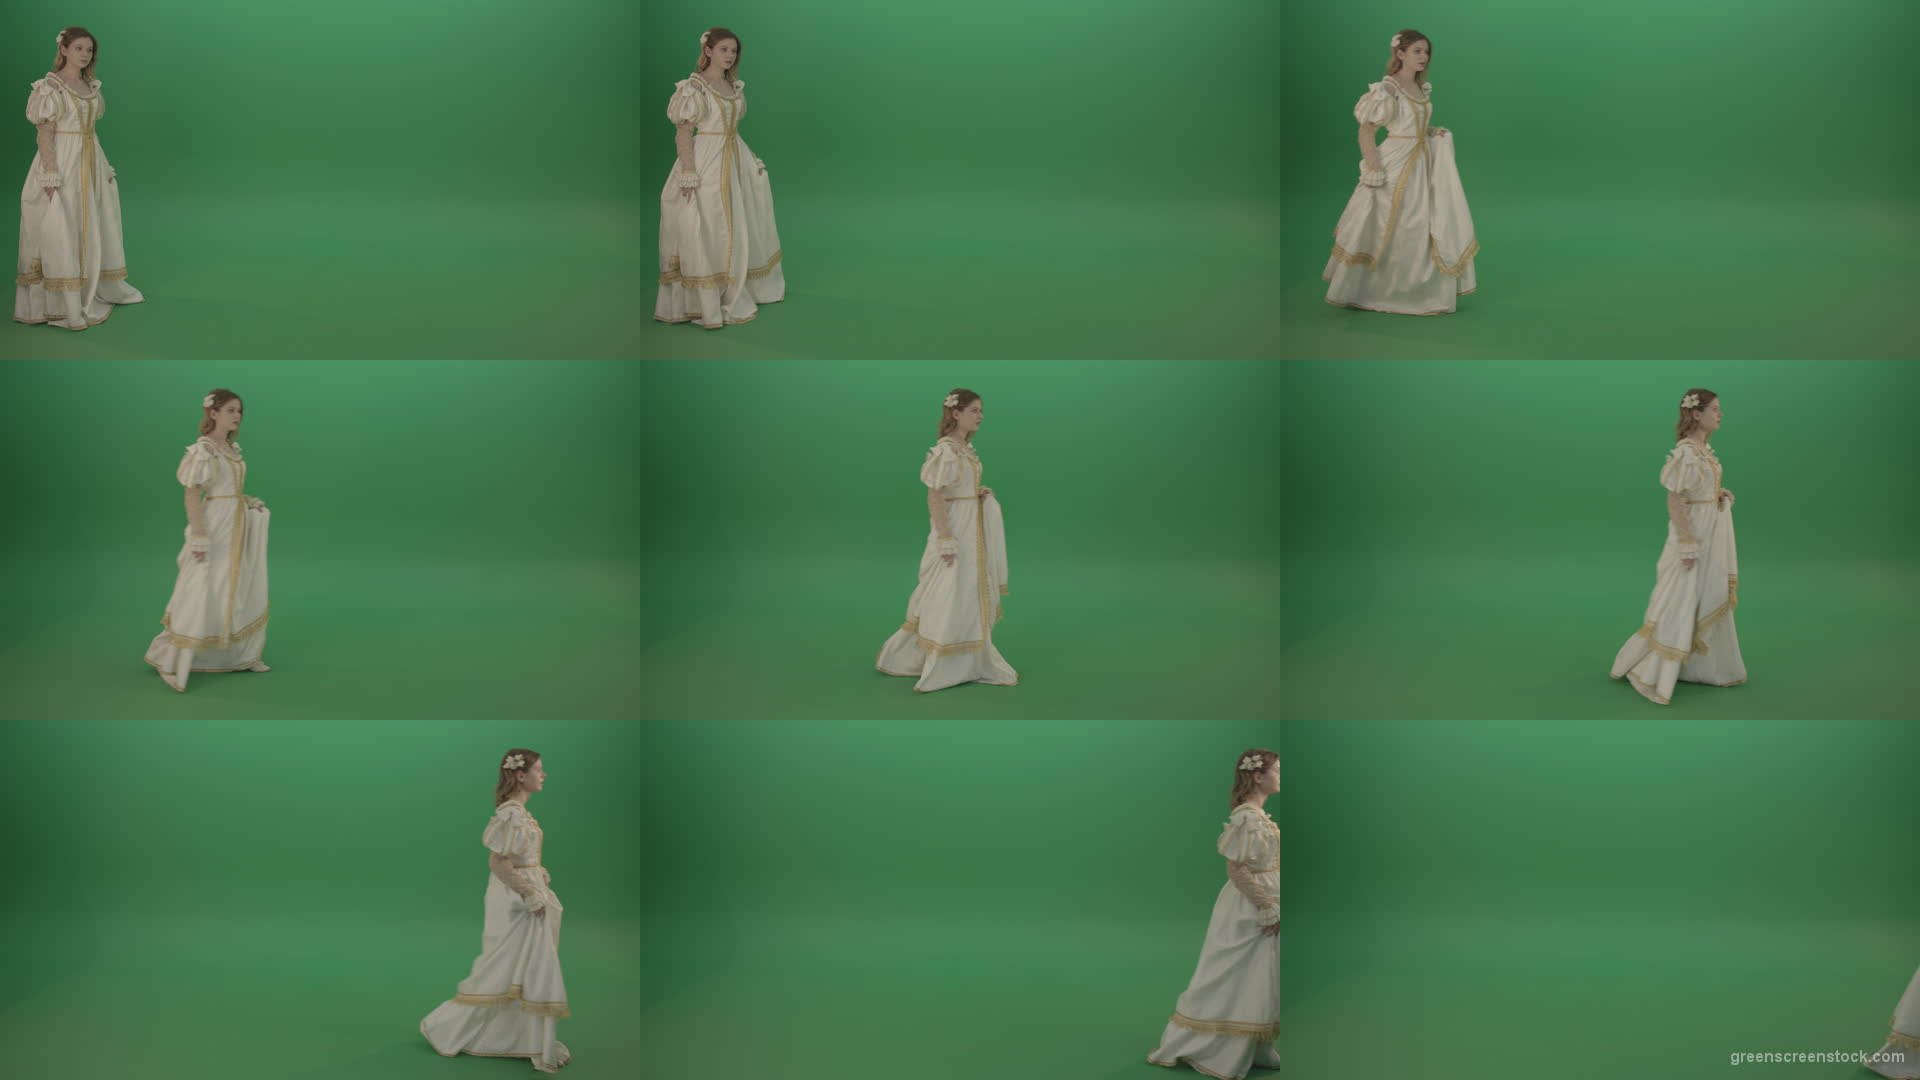 Mysterious-princess-makes-a-white-dress-goes-aside-isolated-on-green-background Green Screen Stock